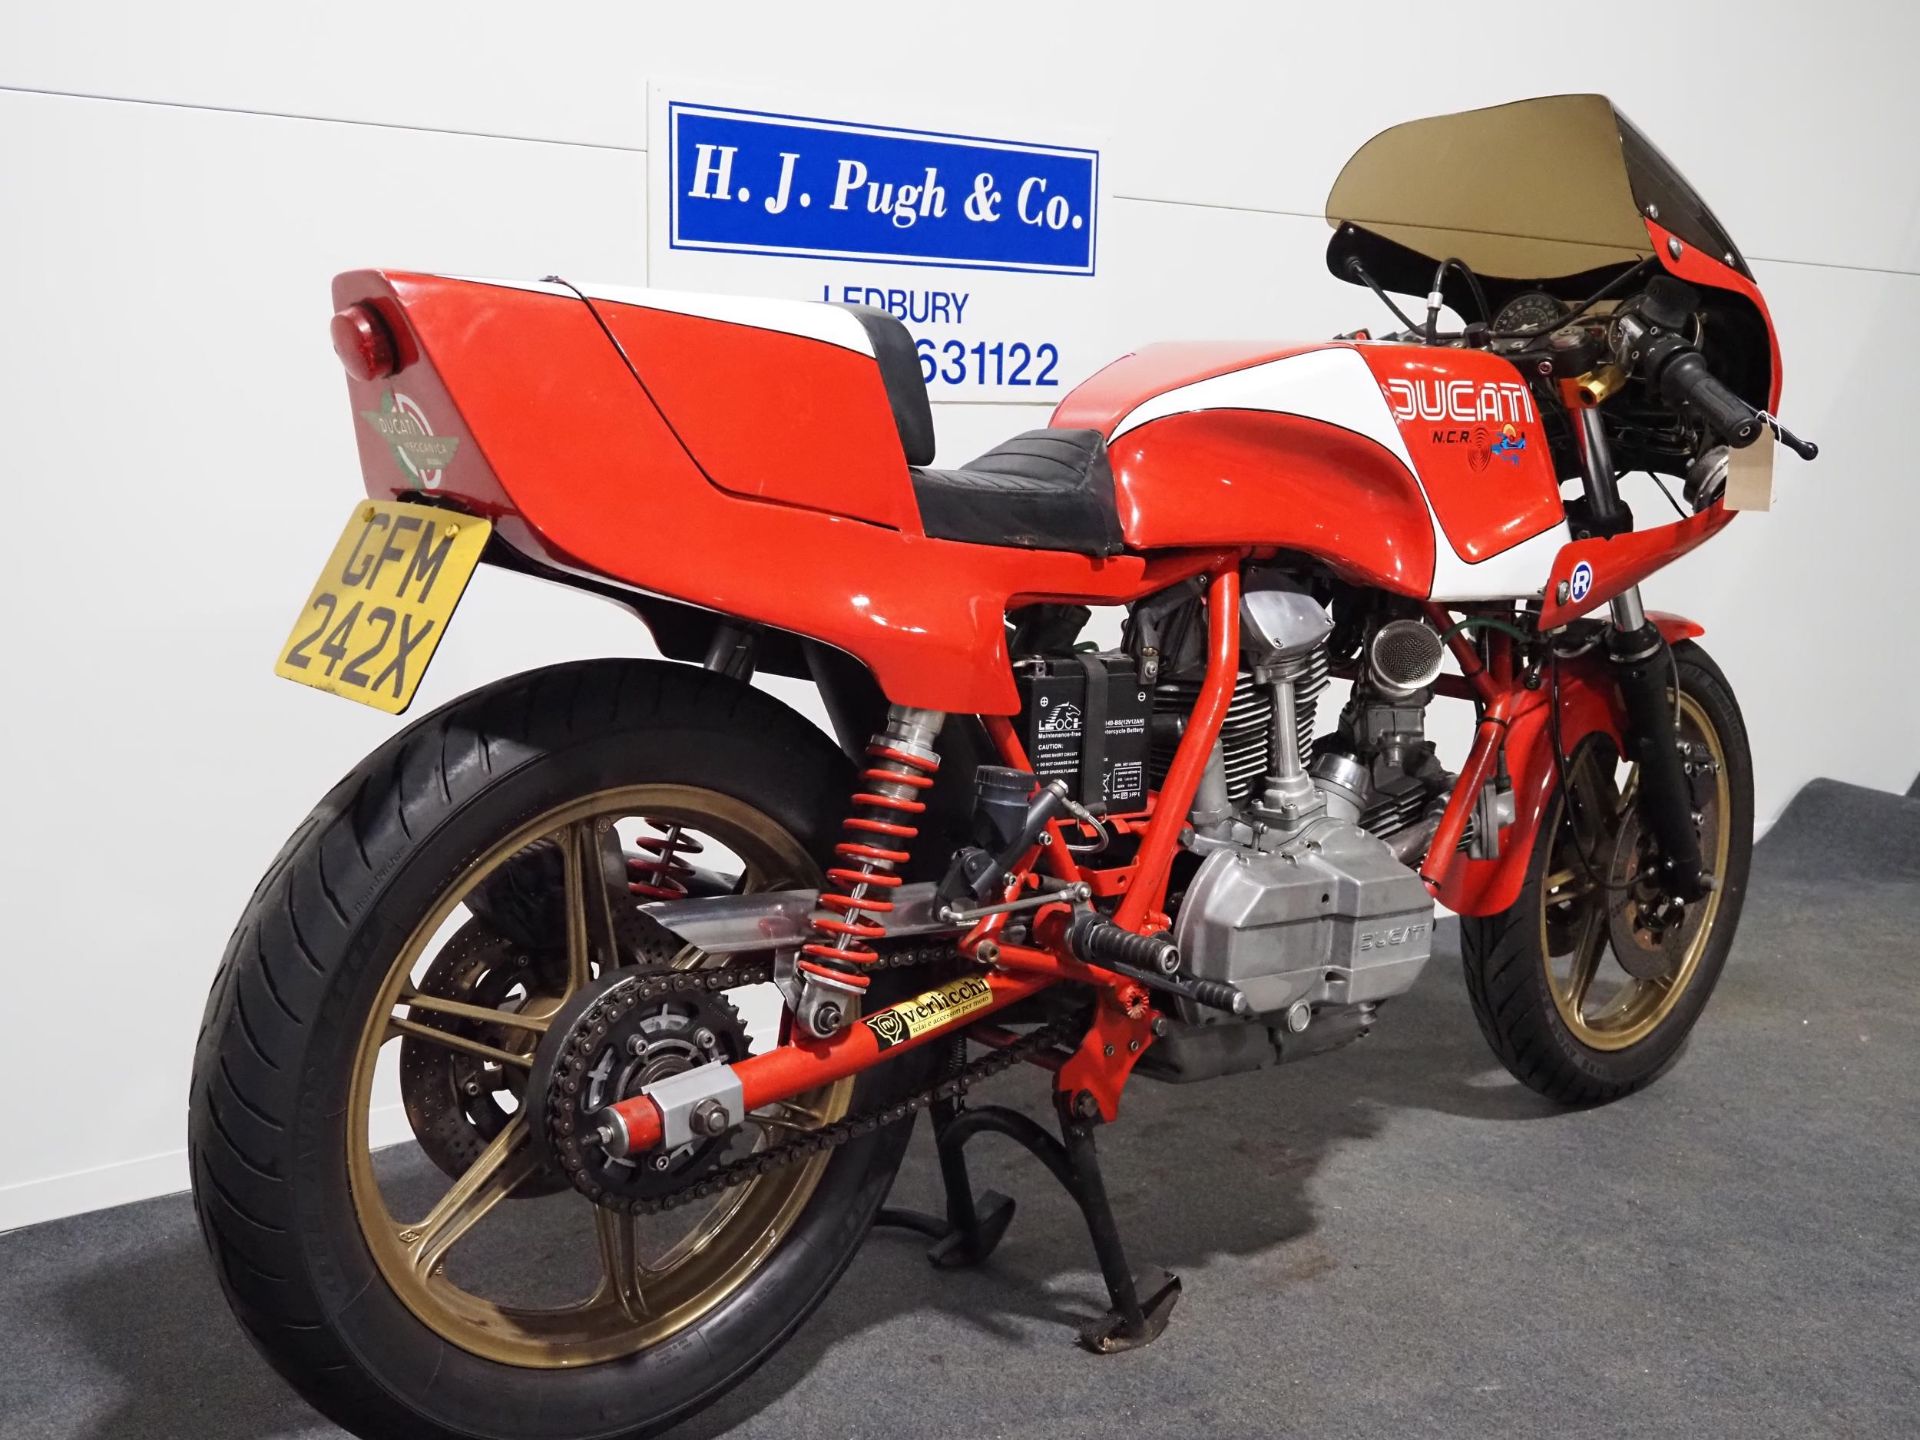 Ducati Darmah motorcycle. 1982. 900cc. Frame No. 952313. Engine No. 906036. Marzocchi forks. 40mm - Image 3 of 5